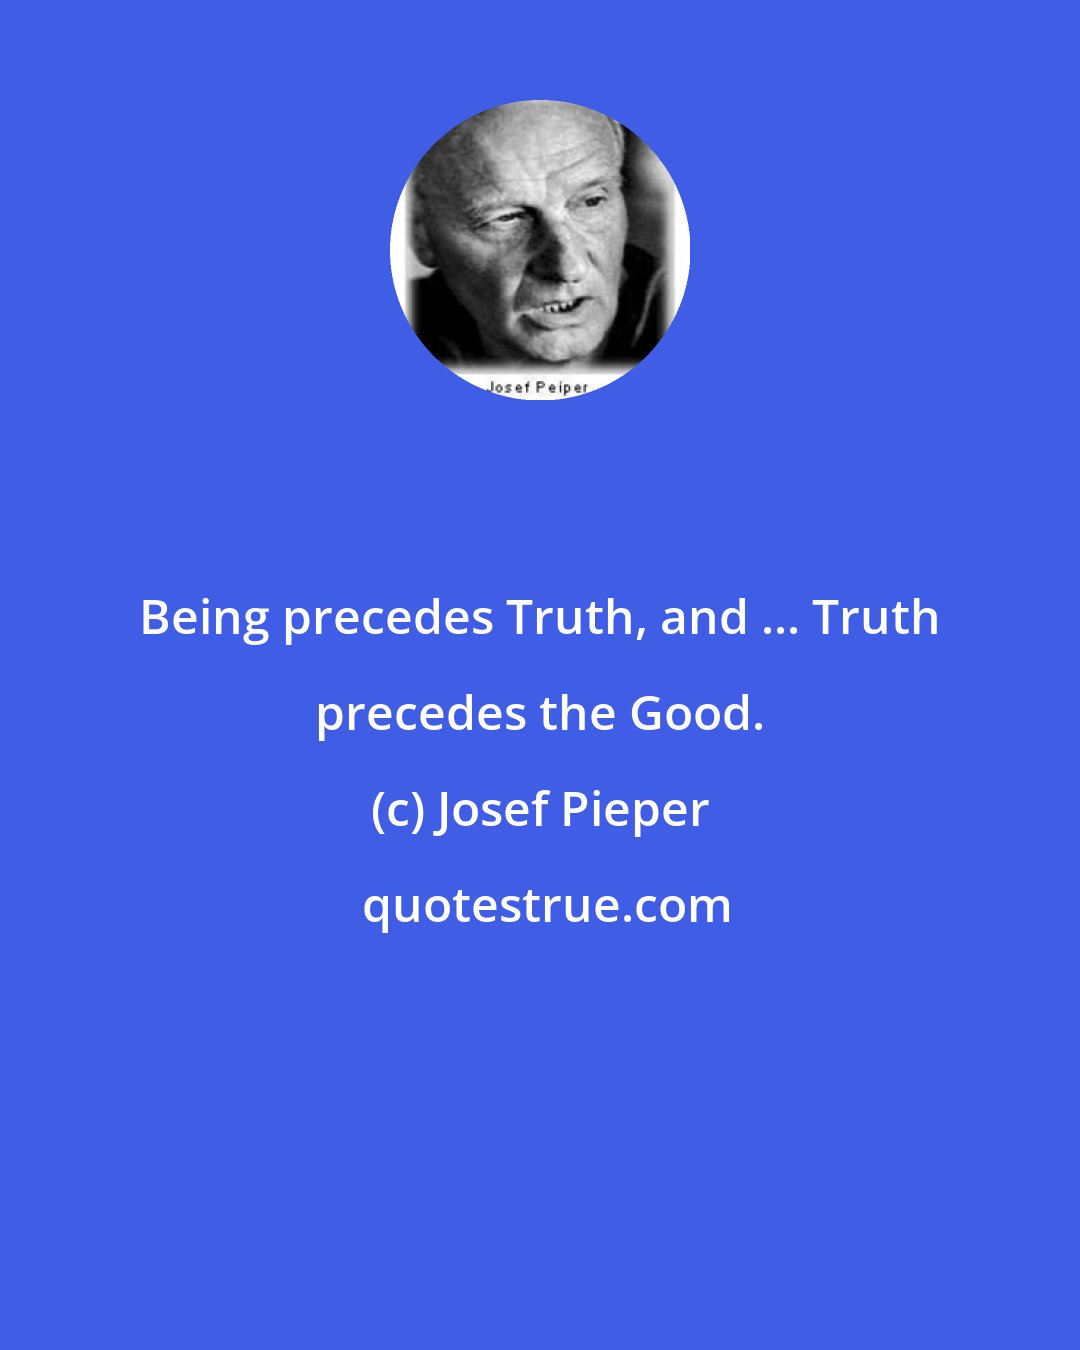 Josef Pieper: Being precedes Truth, and ... Truth precedes the Good.